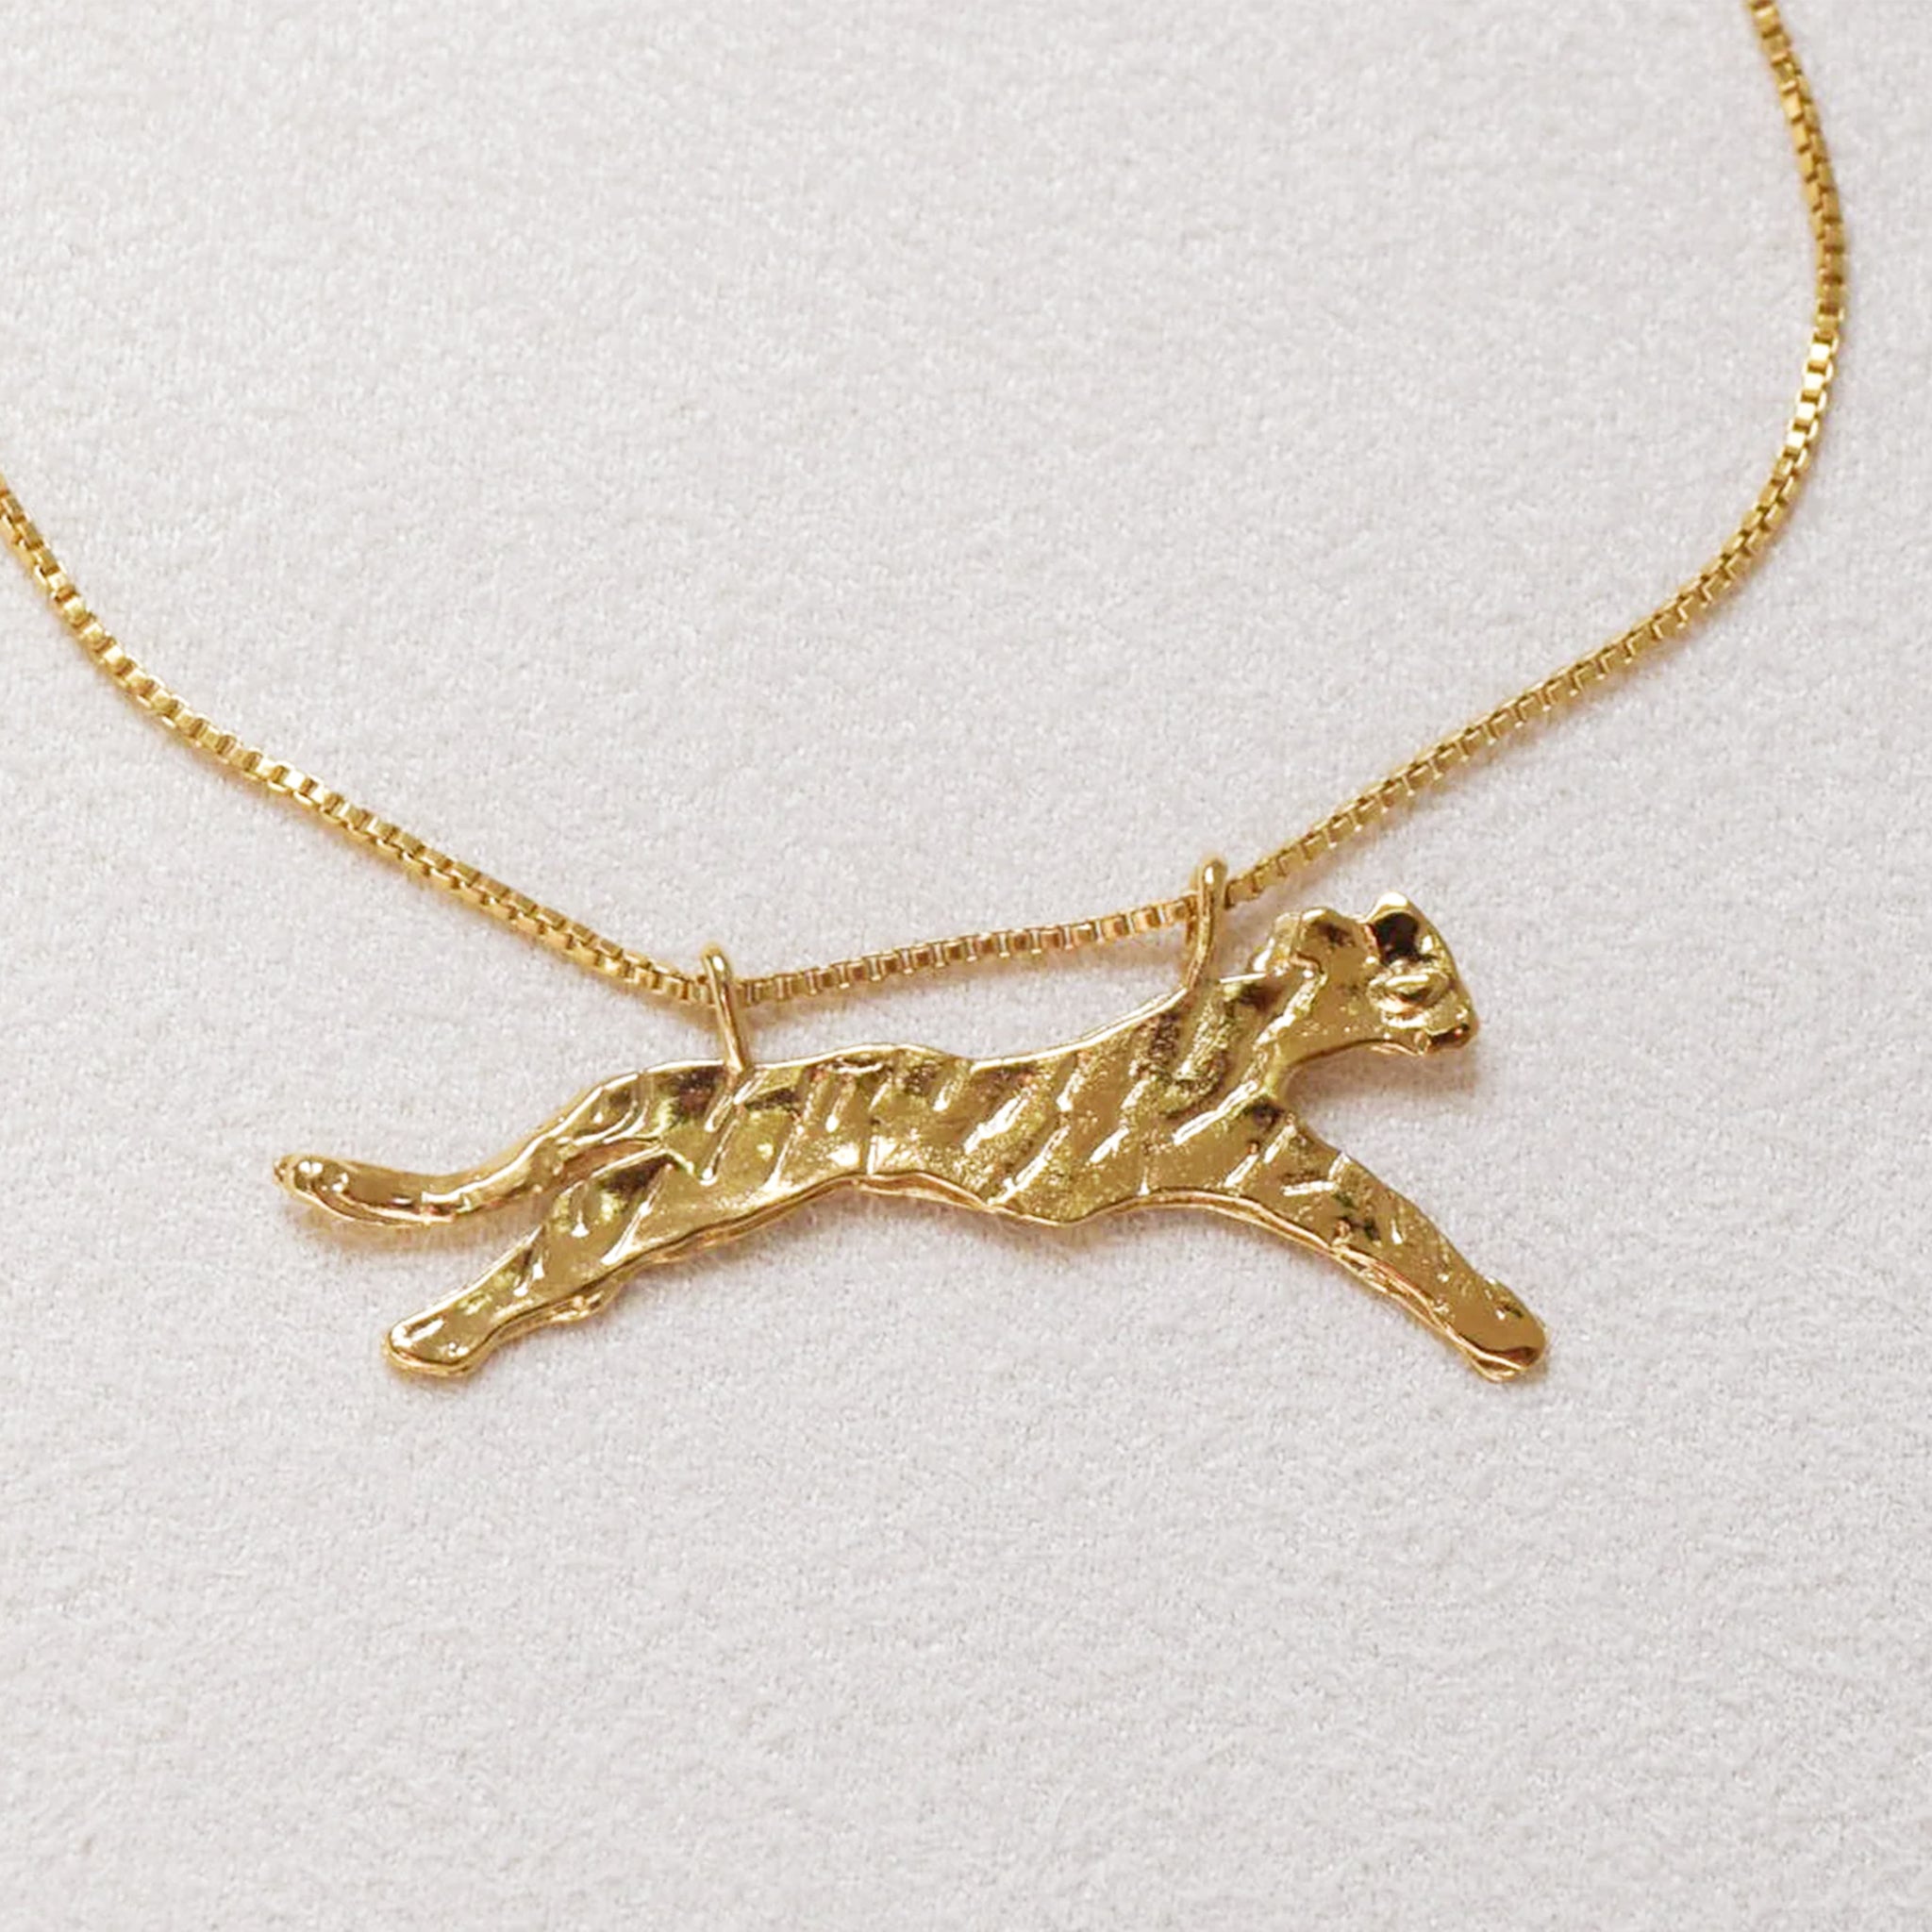 A leopard shaped gold pendant with a gold chain necklace.